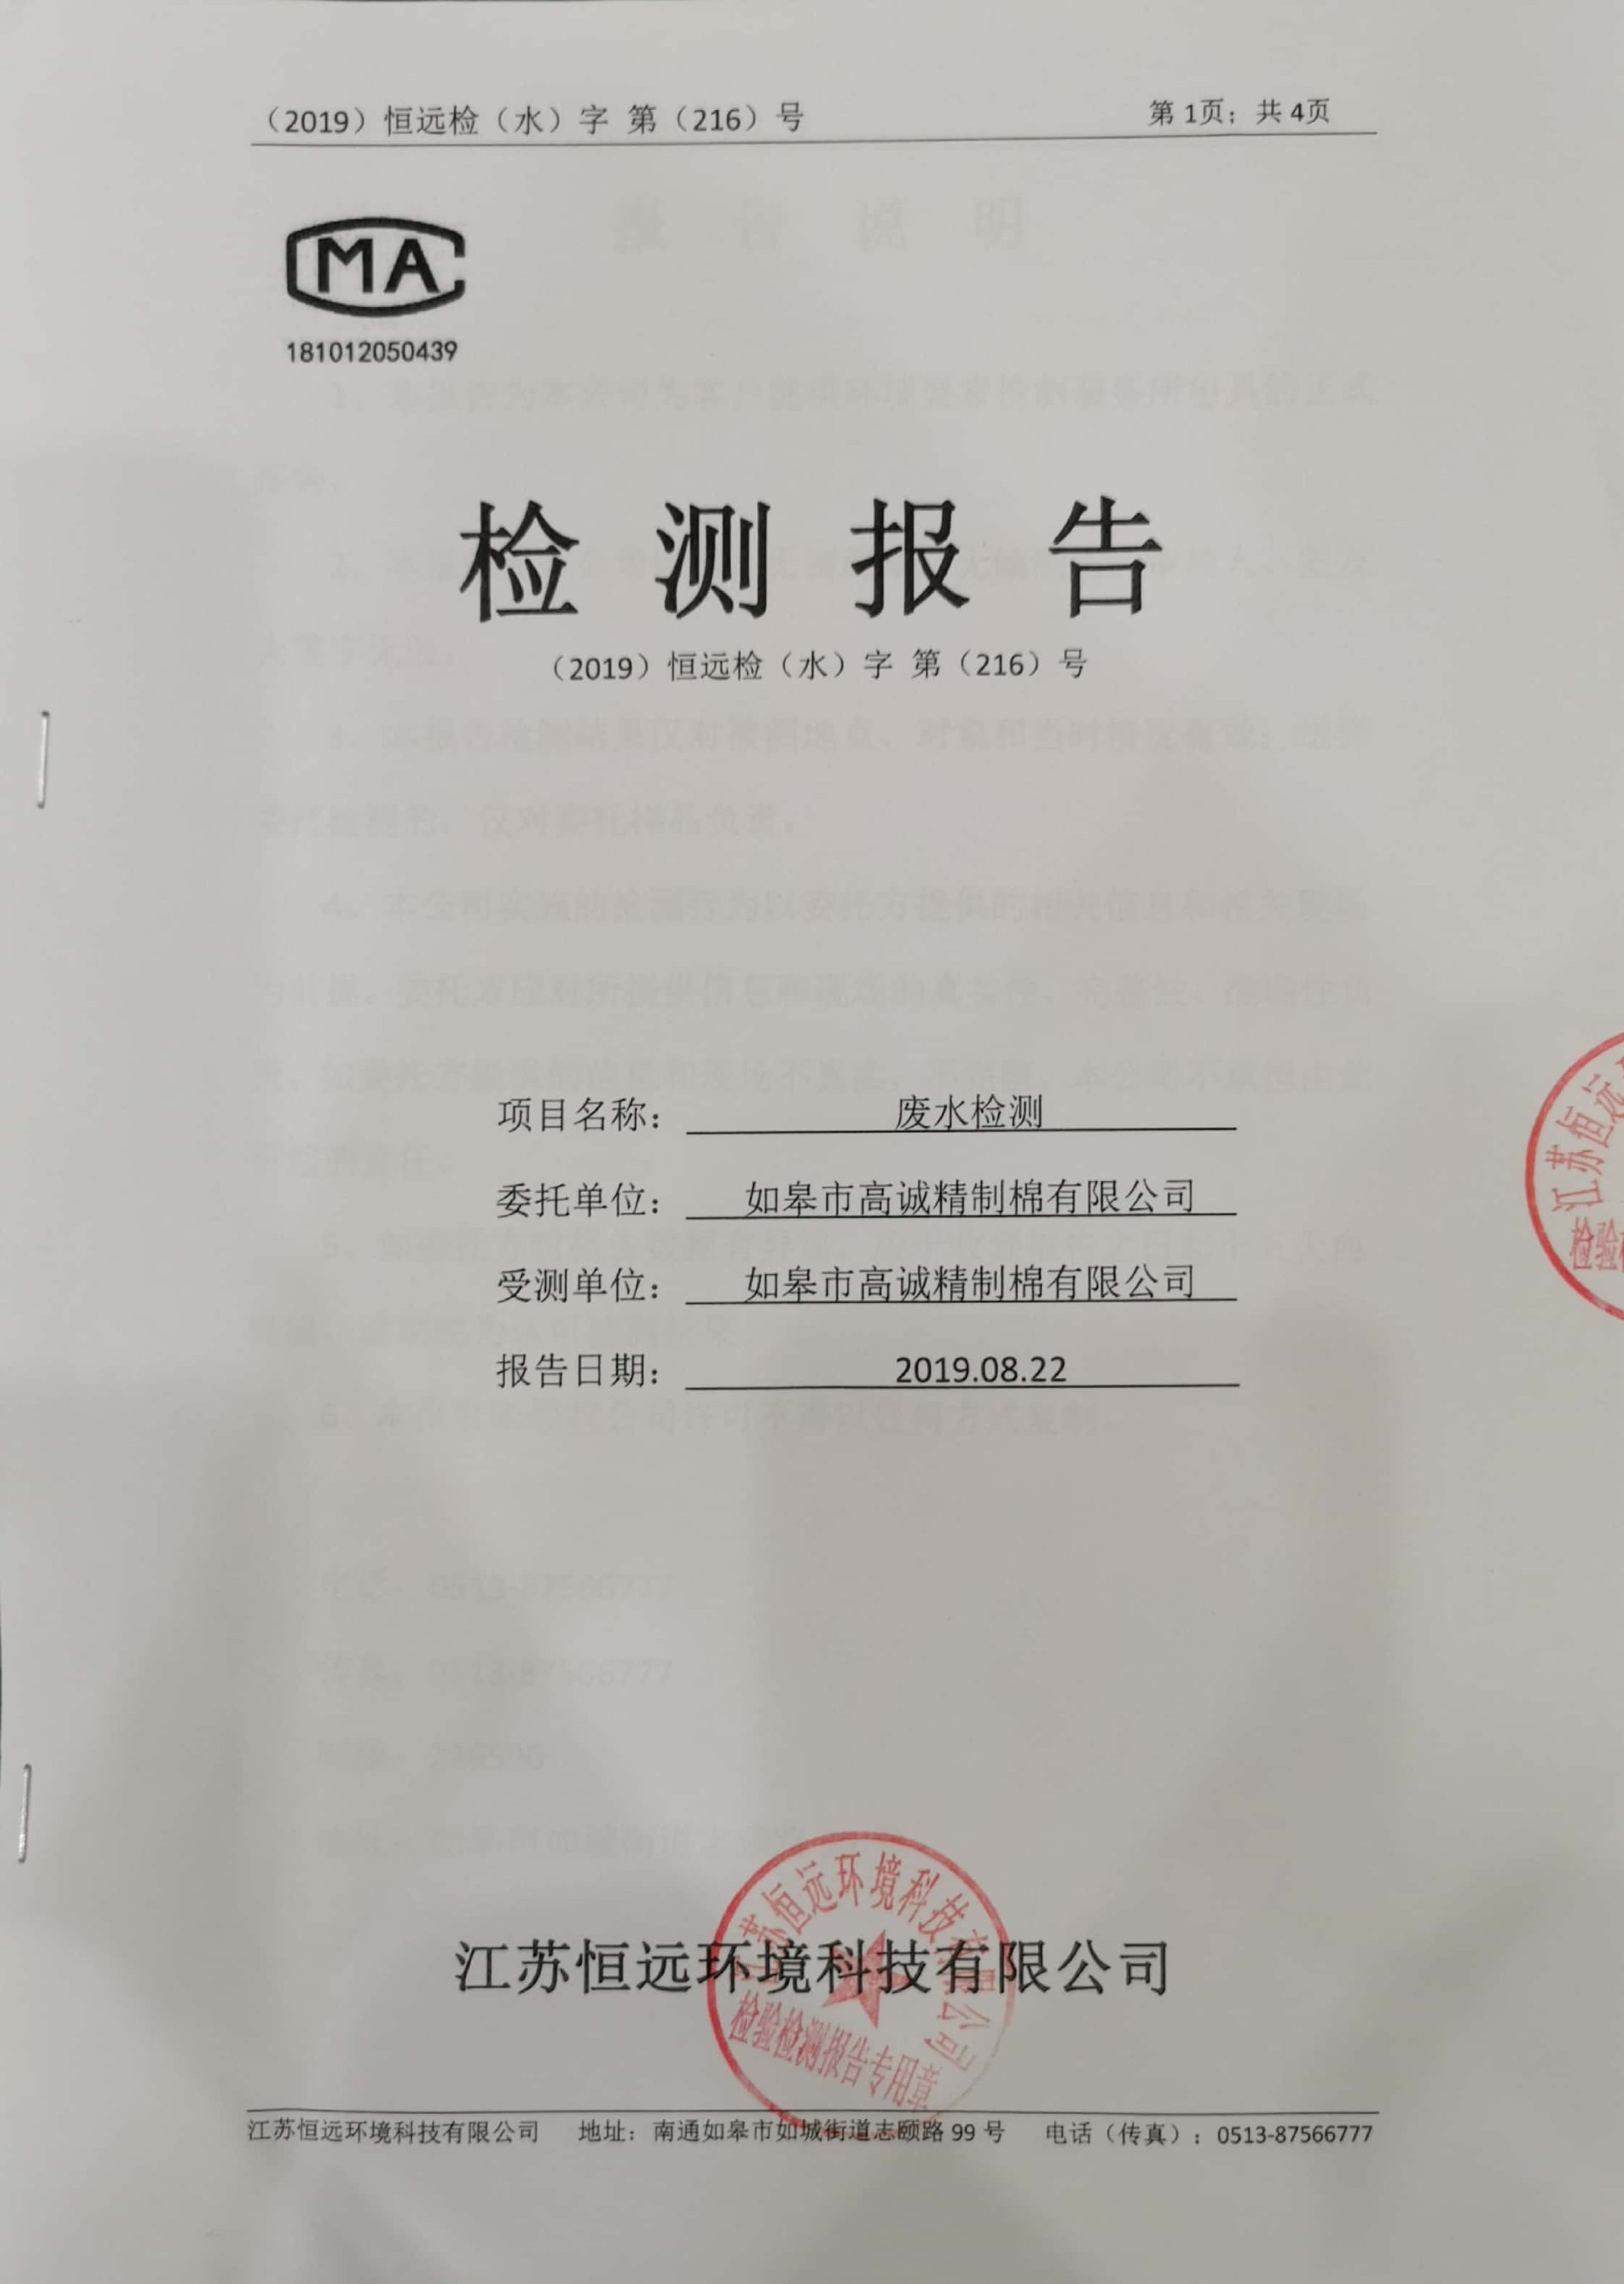 Wastewater Testing Report of Rugao Gaocheng Refined Cotton Co., Ltd